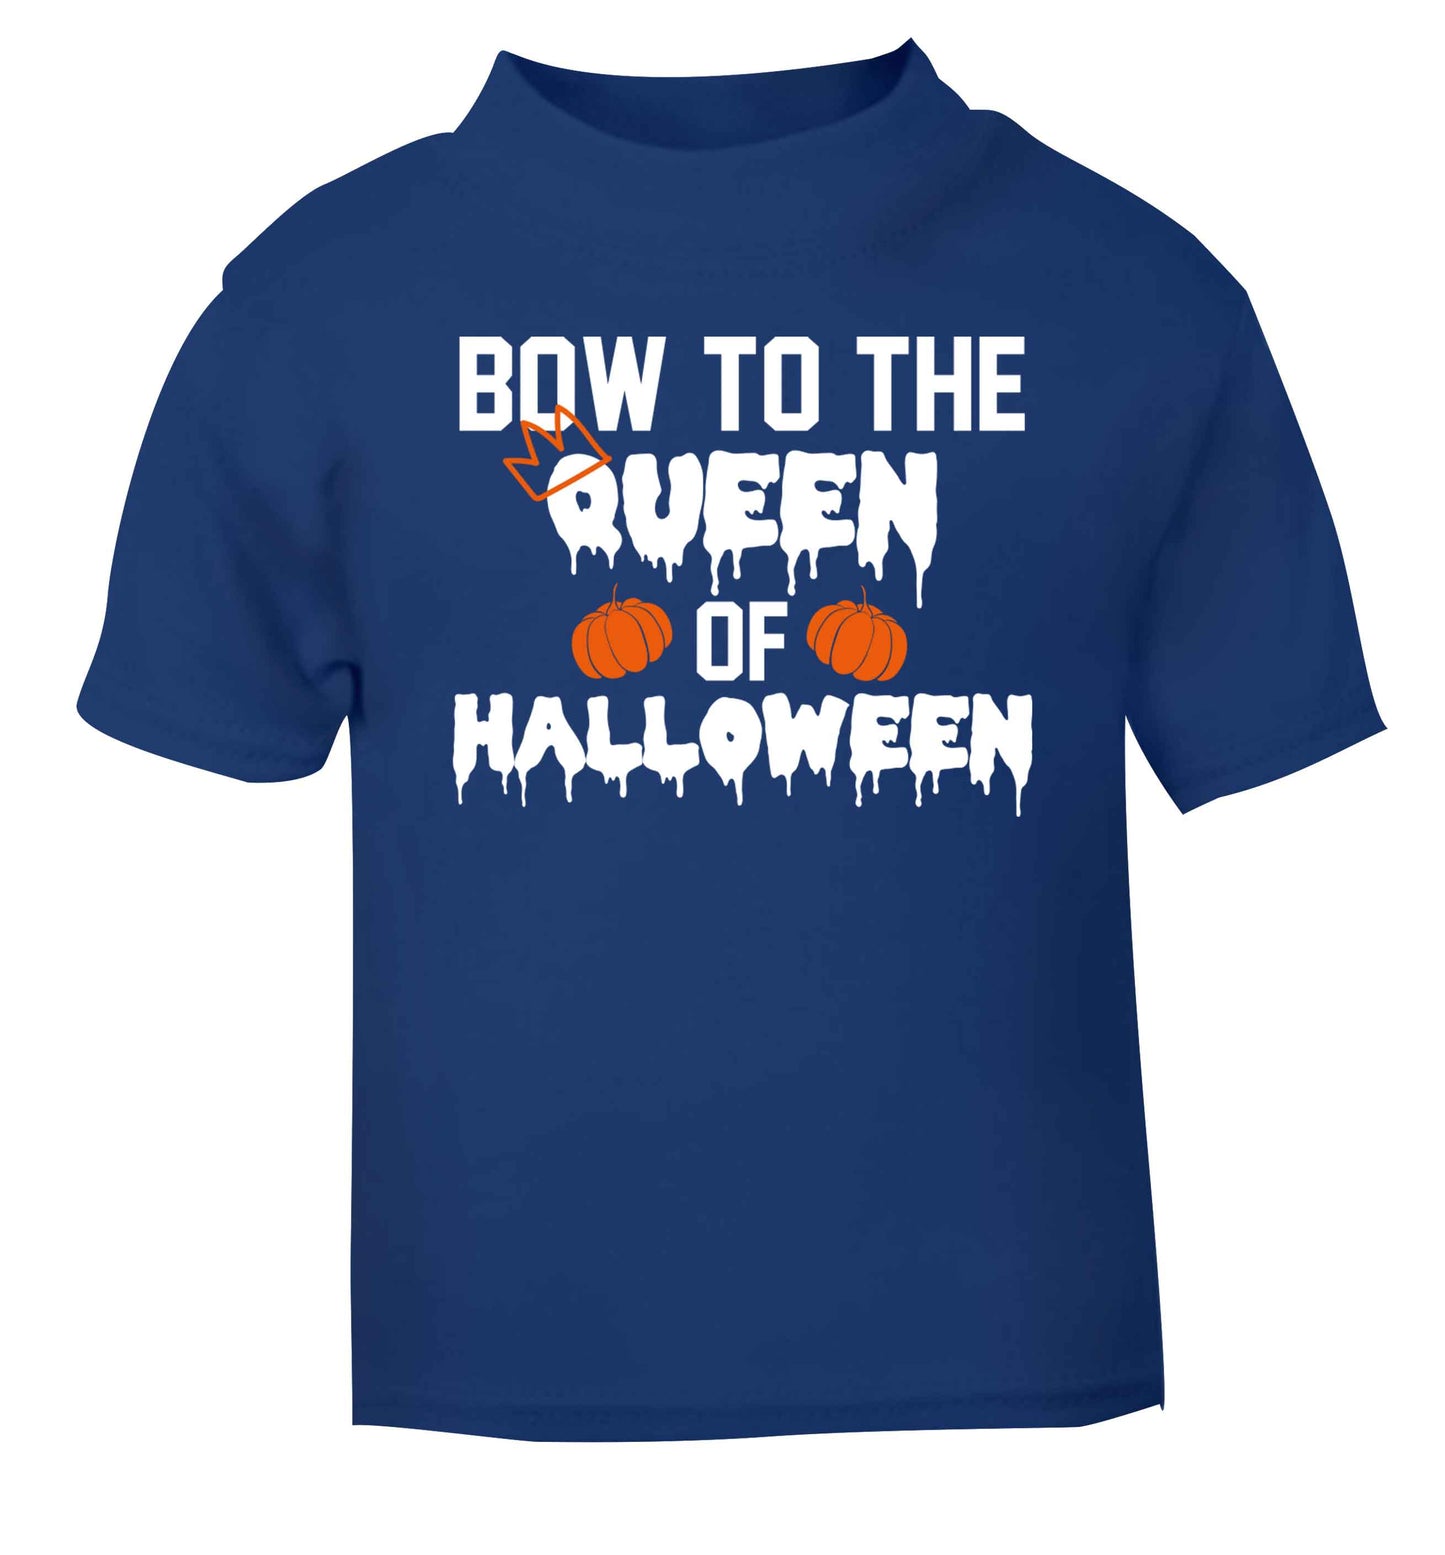 Bow to the Queen of halloween blue baby toddler Tshirt 2 Years